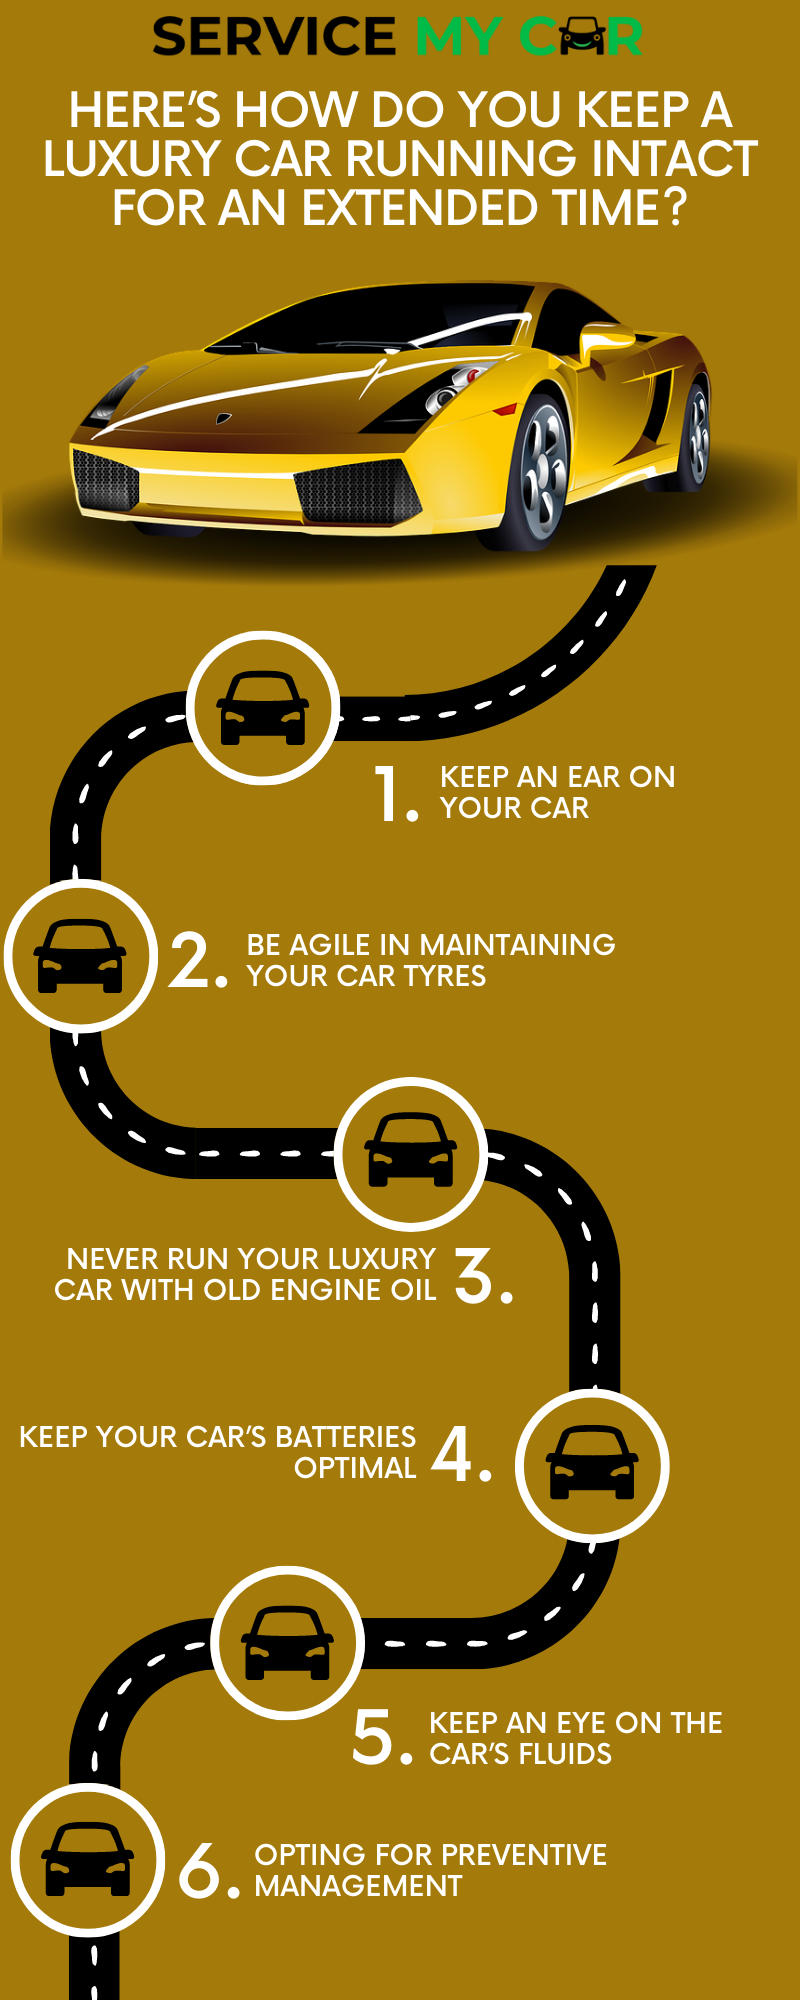 Here’s How Do You Keep A Luxury Car Running Intact For An Extended Time (2)